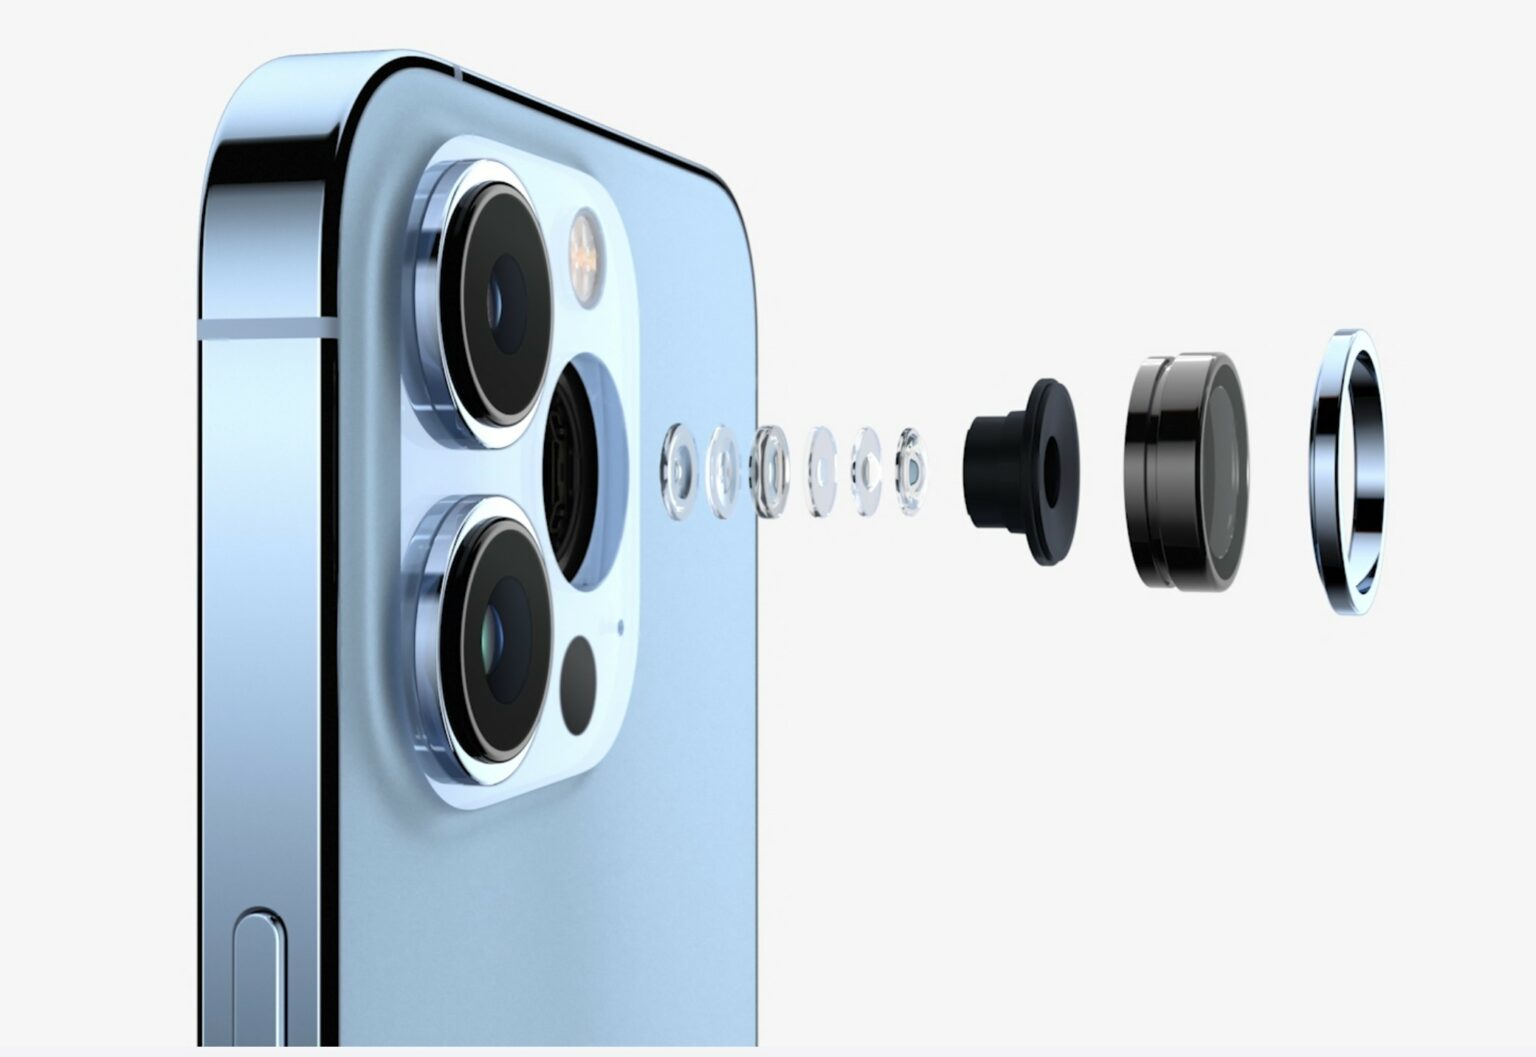 iPhone 13 Pro's new Ultrawide camera enables impressive-looking macro photography.